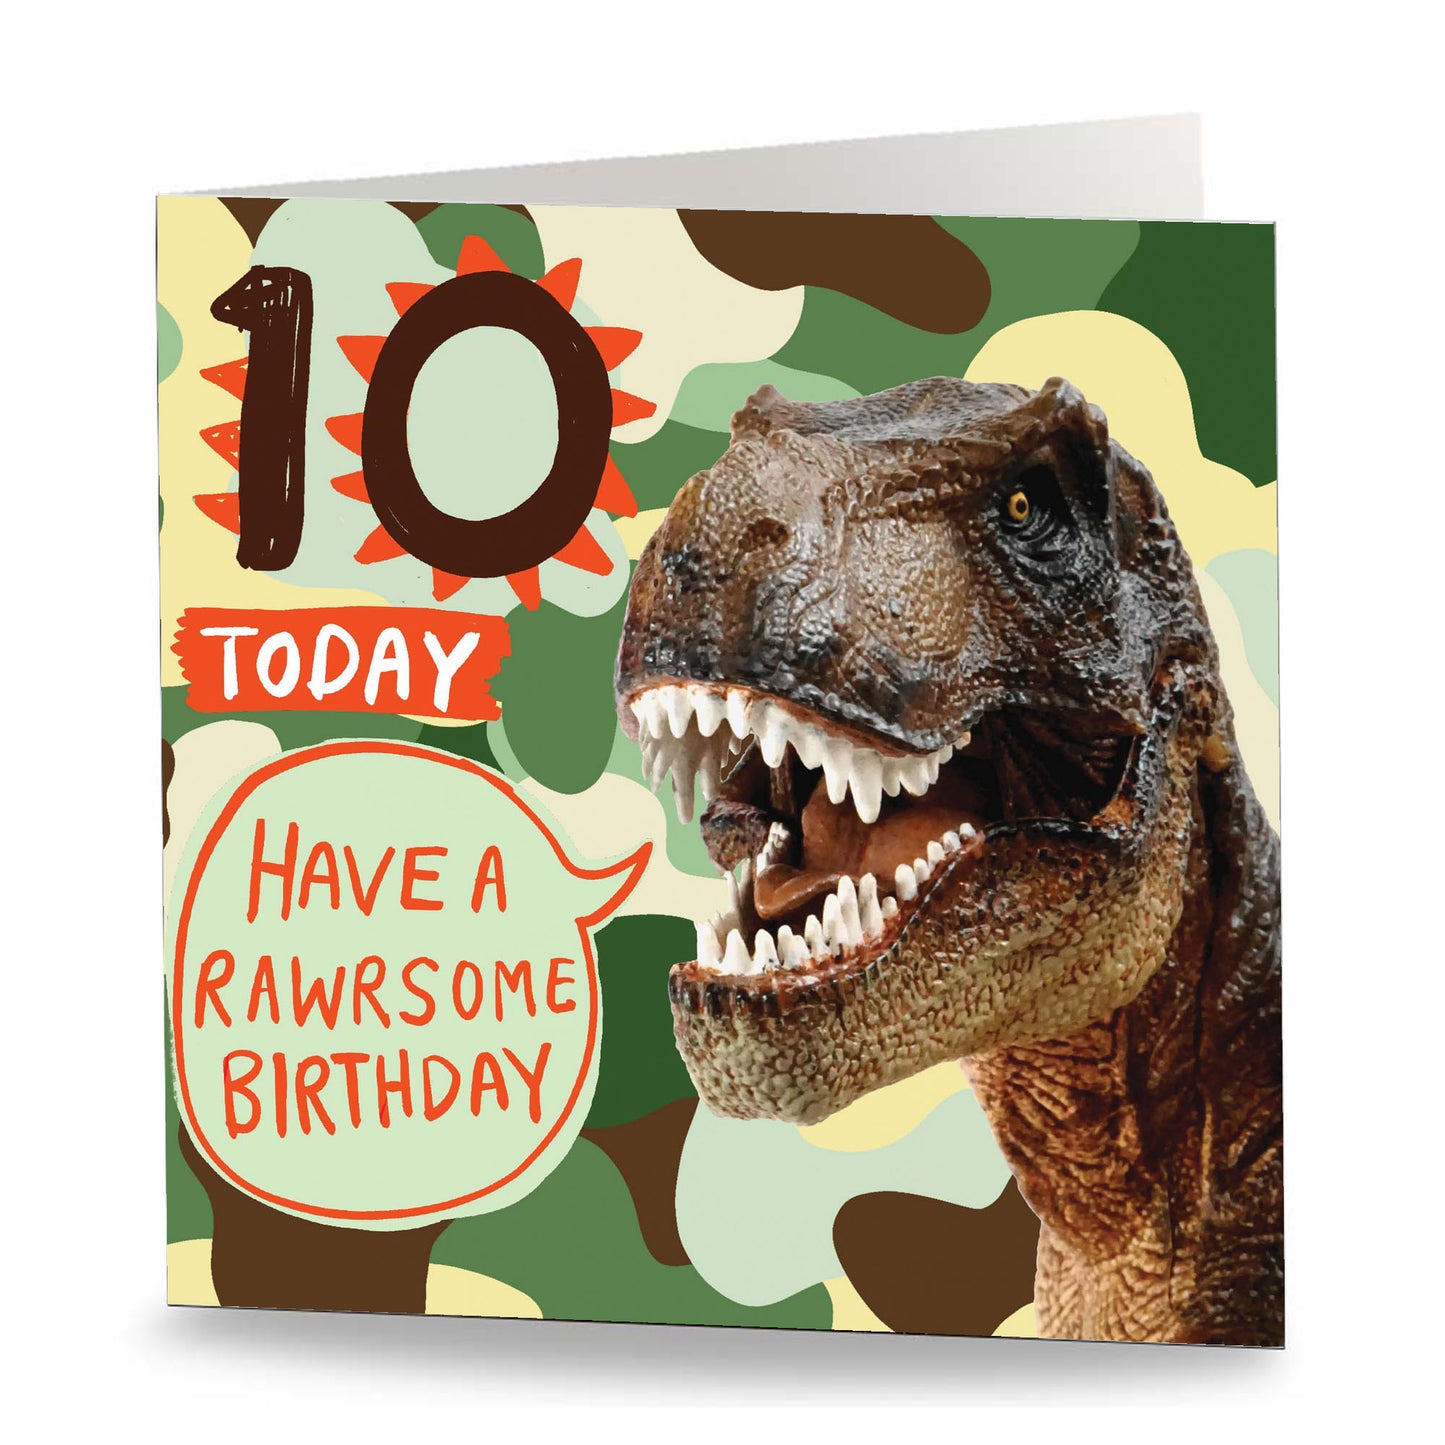 10 Today - Rawrsome Green Camo Card